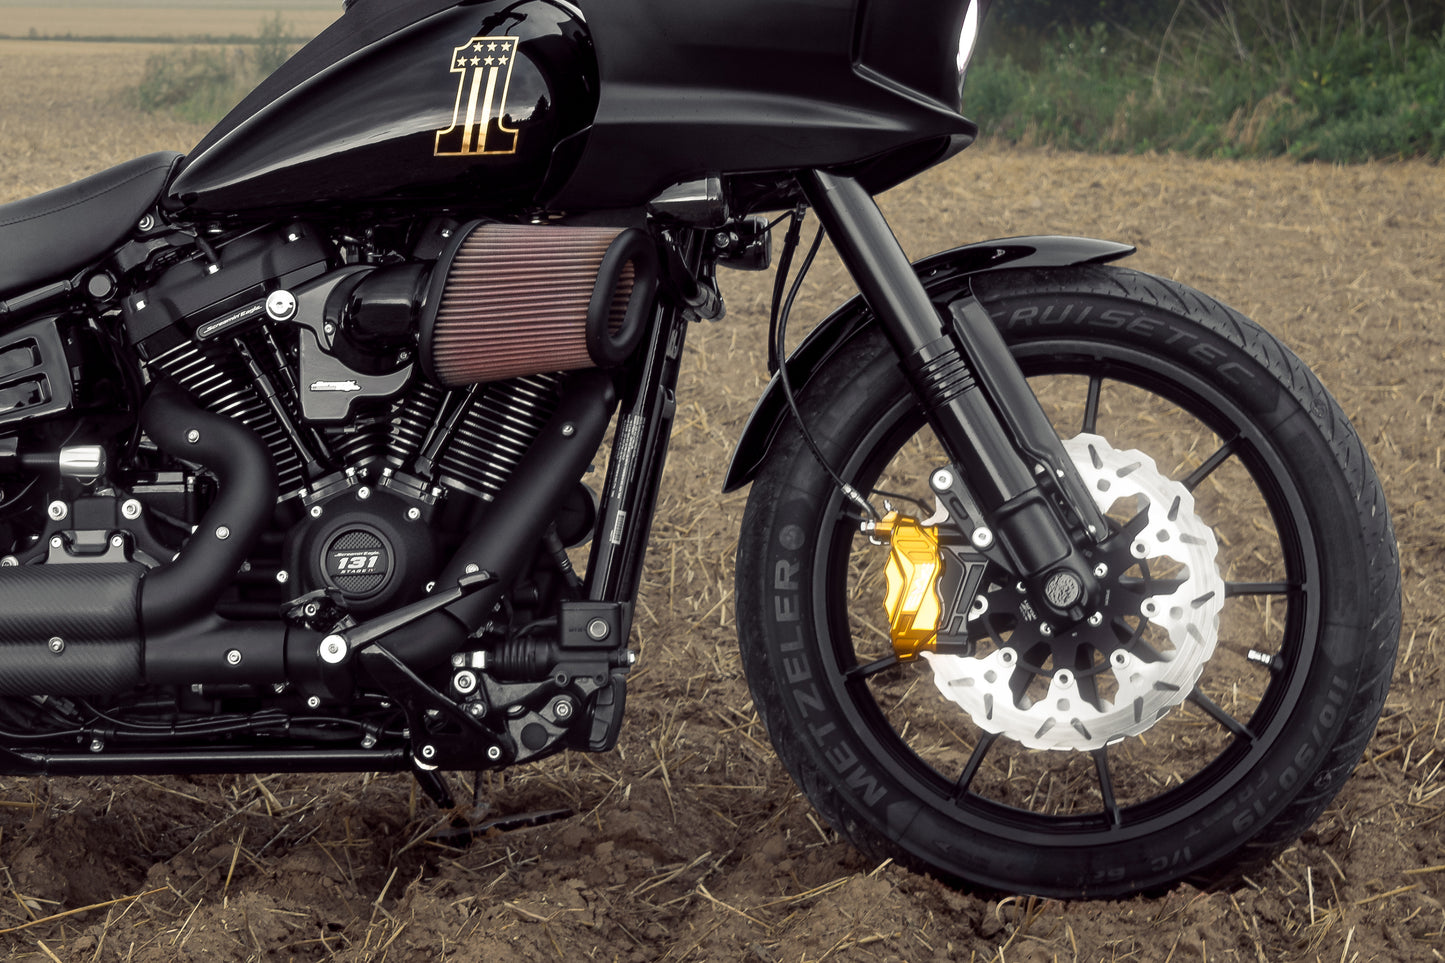 Harley Davidson motorcycle with Killer Custom fat bob and low ride lower fork covers from the side in a nature environment